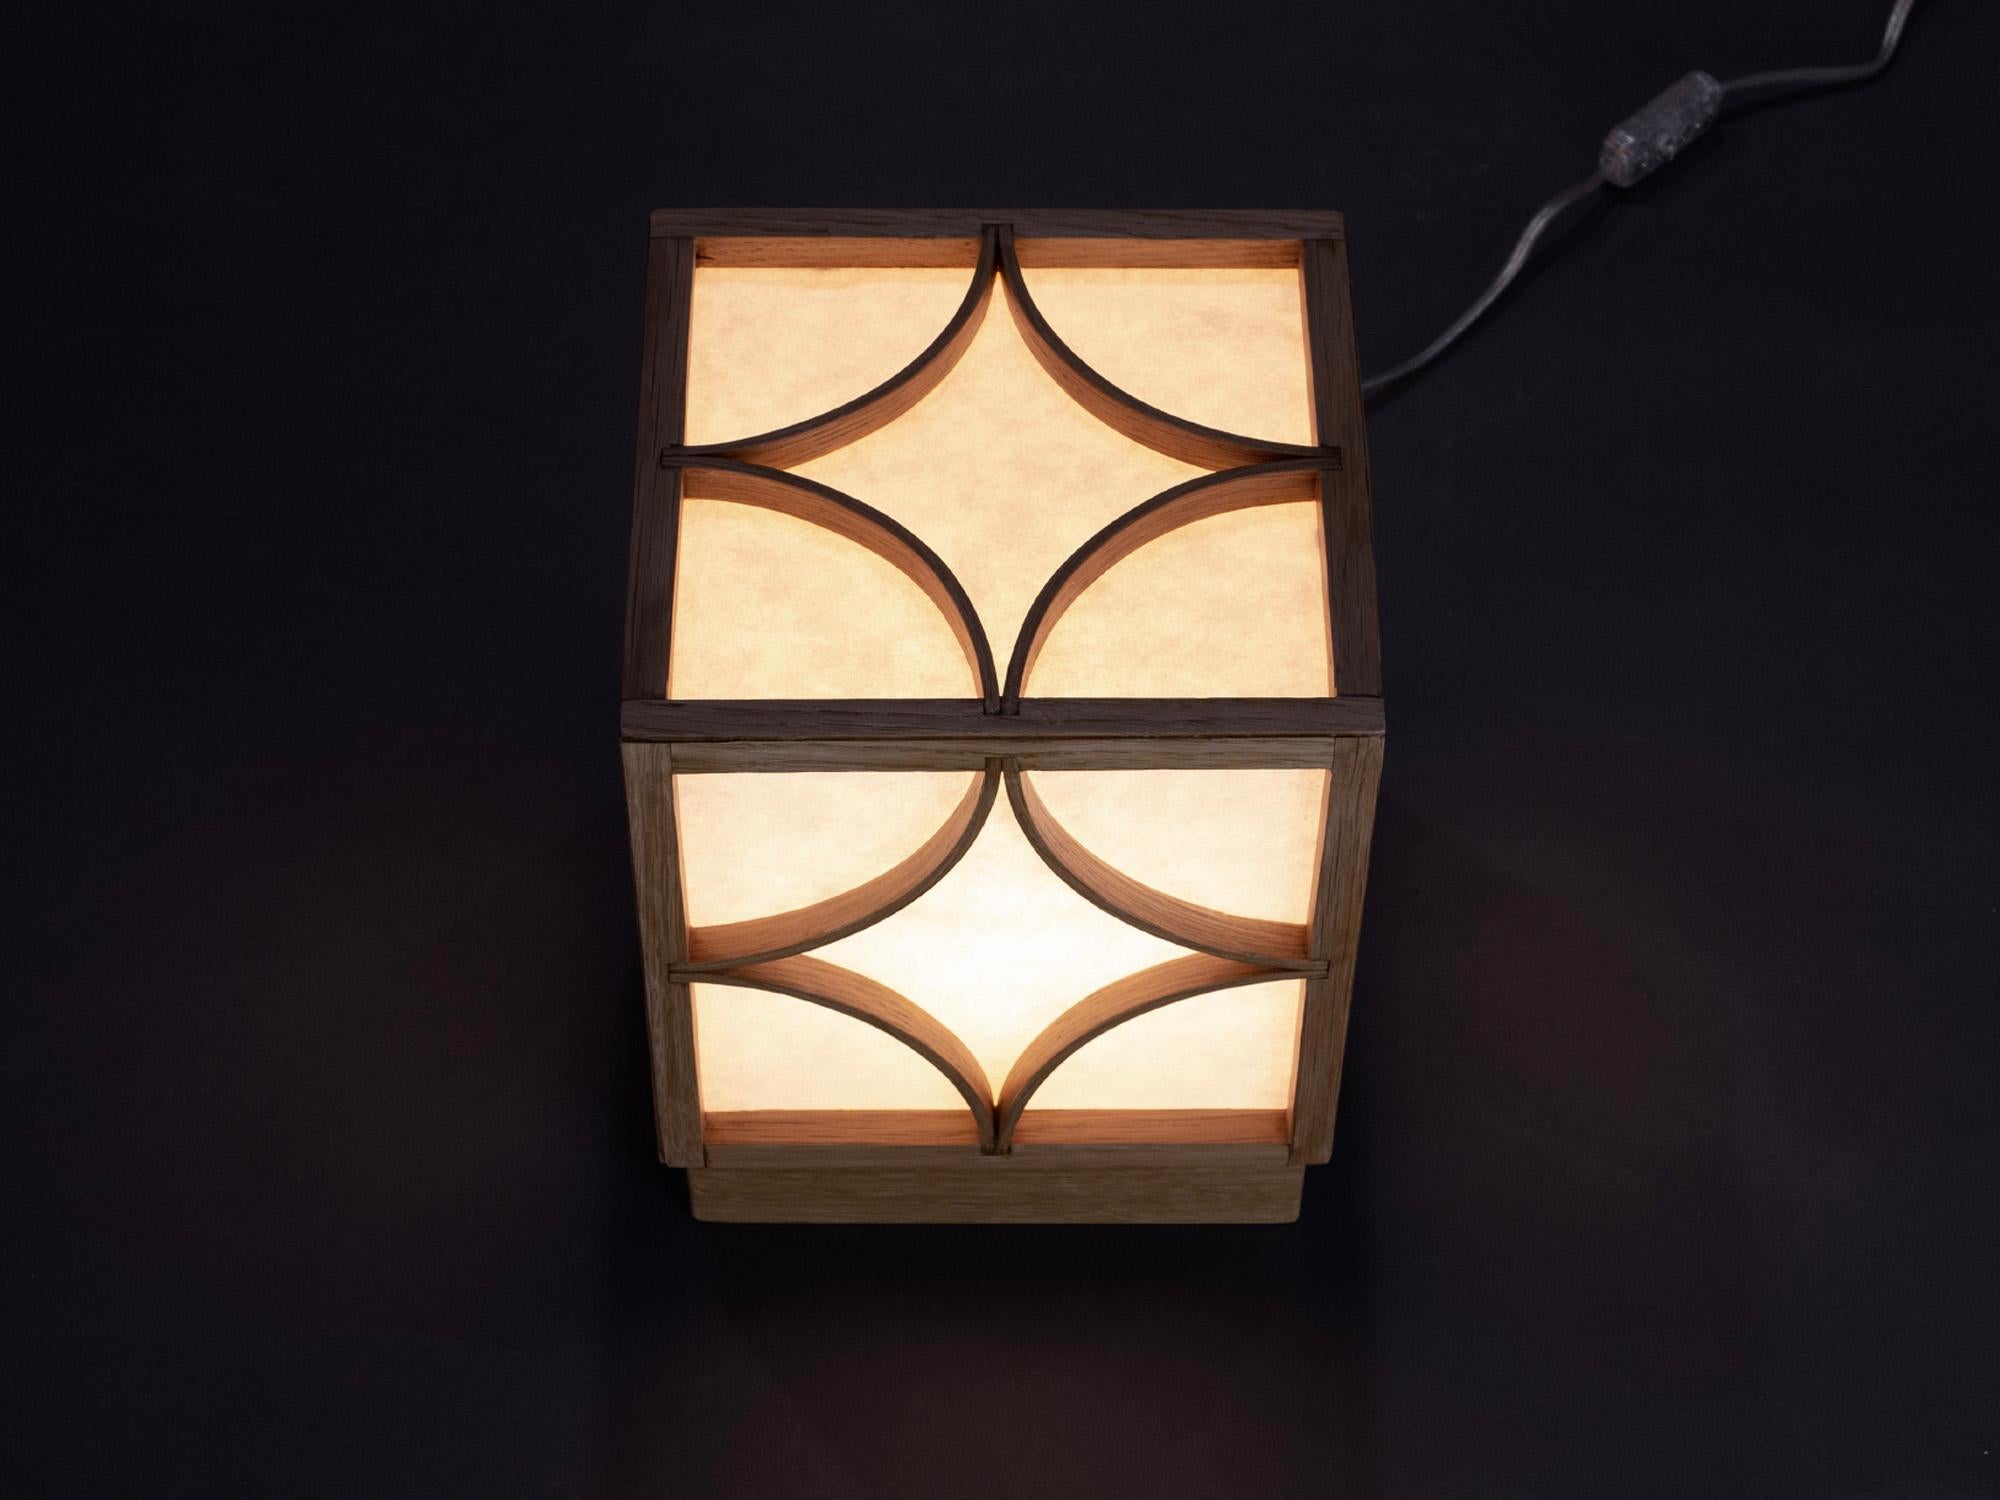 Minimalist TABLE LAMP hand-crafted using a steam bent white oak frame and Japanese shoji pa For Sale